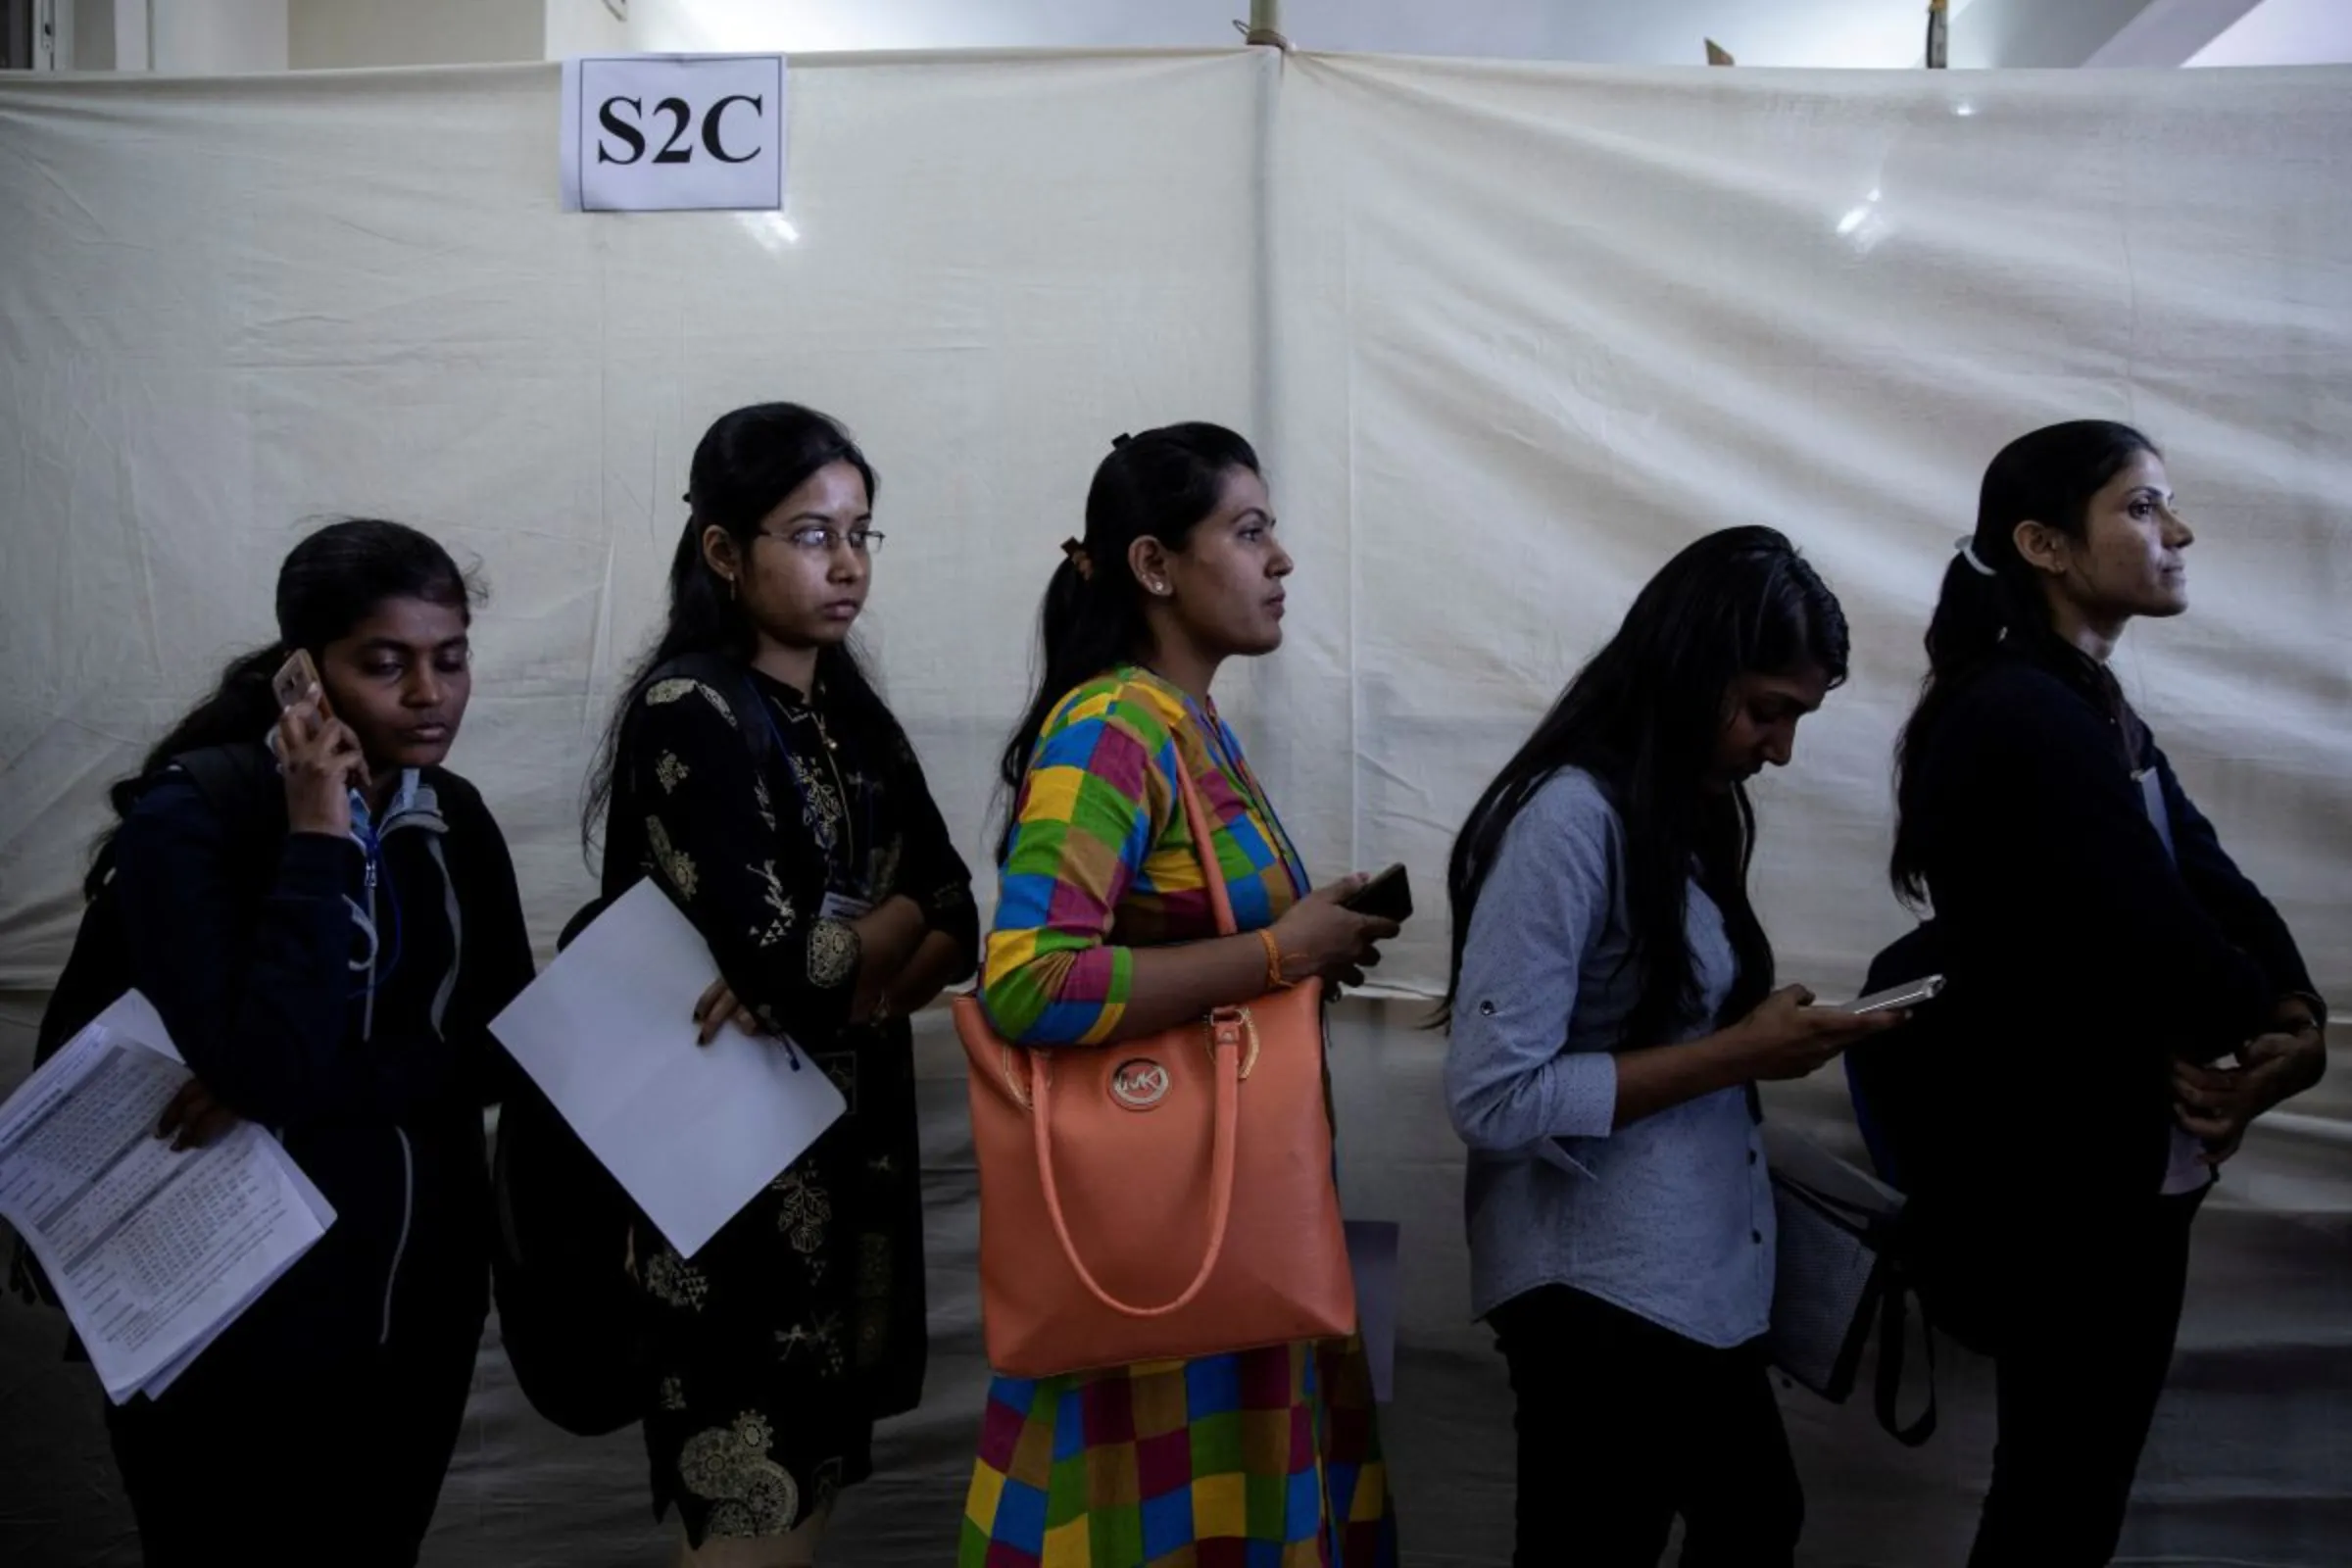 Job seekers line up for interviews at a job fair in Chinchwad, India, February 7, 2019. REUTERS/Danish Siddiqui